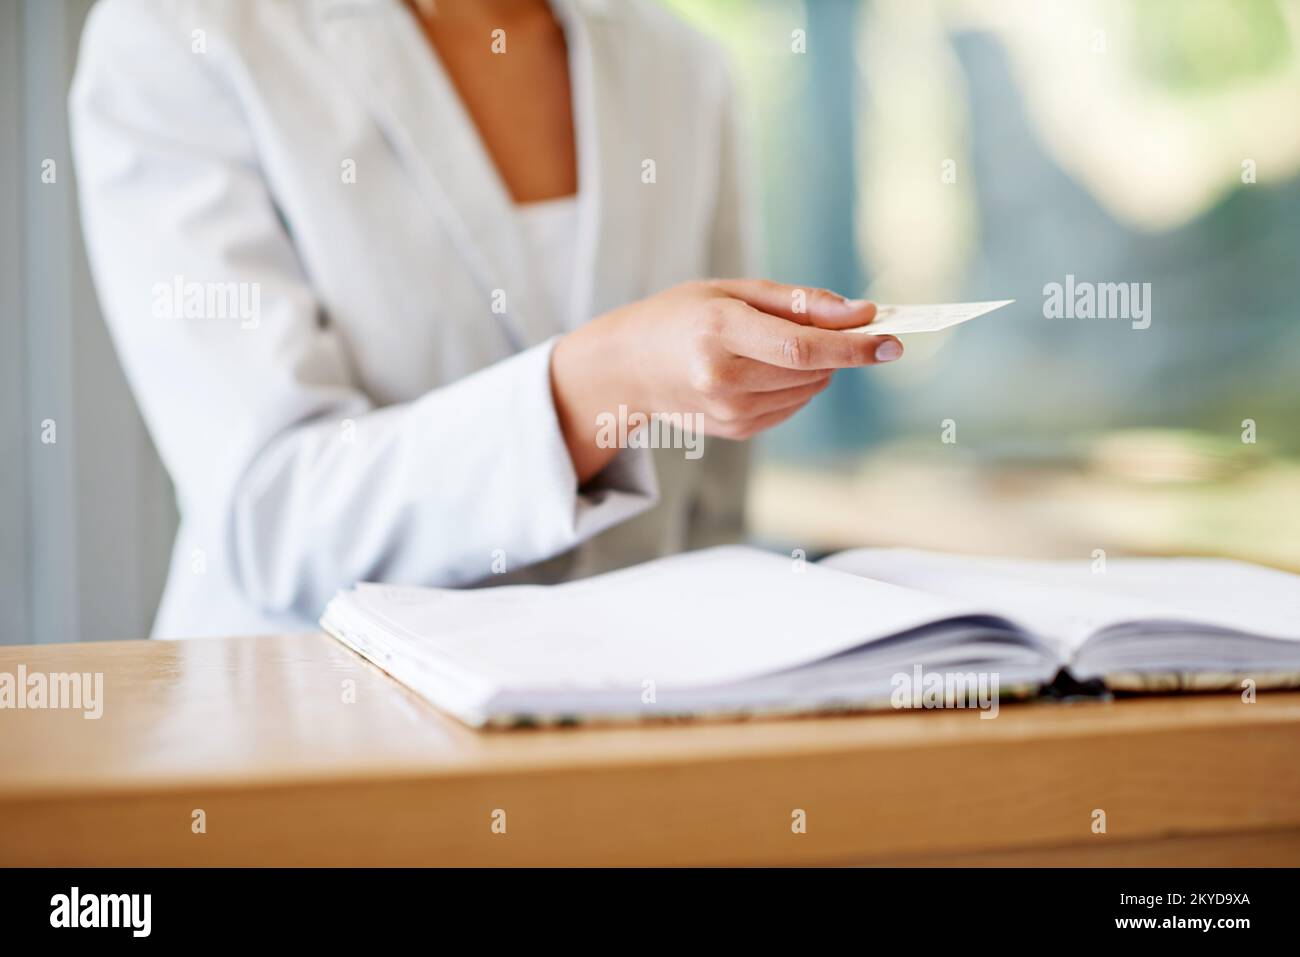 Heres my card. a woman preparing to pay with a credit card at a reception desk. Stock Photo